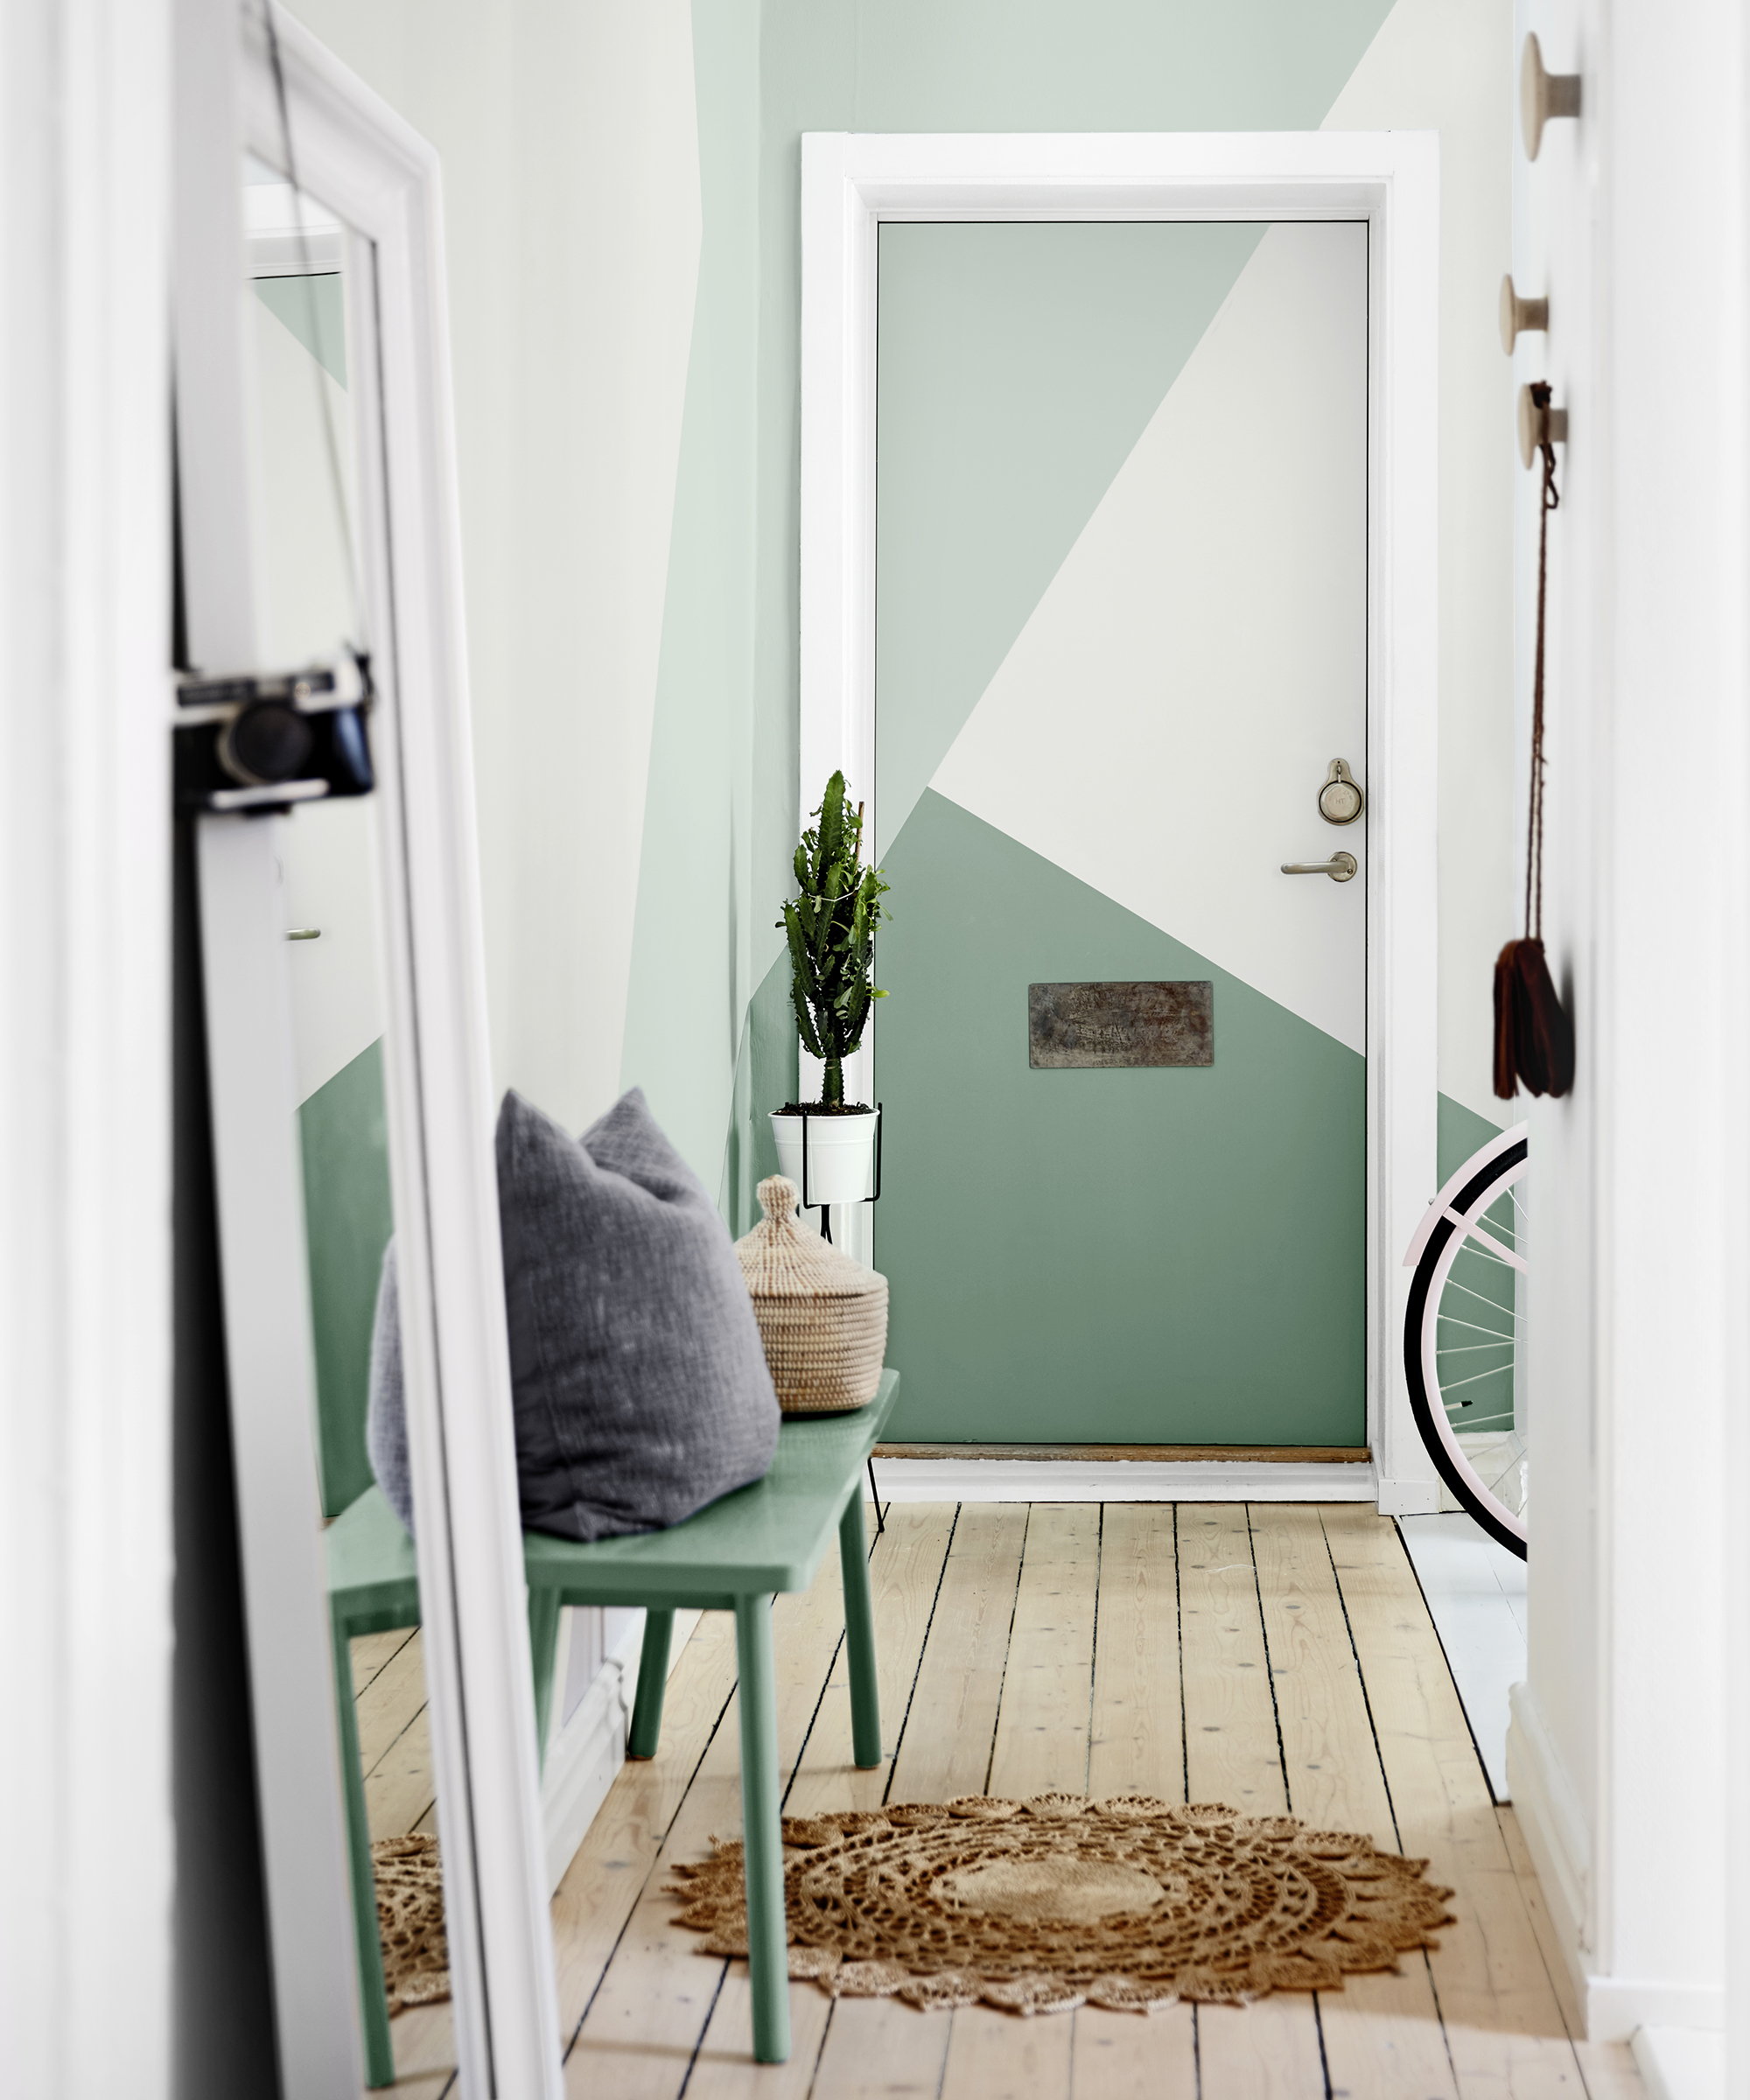 Hallway ideas by Dulux using Chiffon White paint, Highland Falls 2 and Highland Falls 4 green paint shades with floor length mirror, bicycle and jute doormat